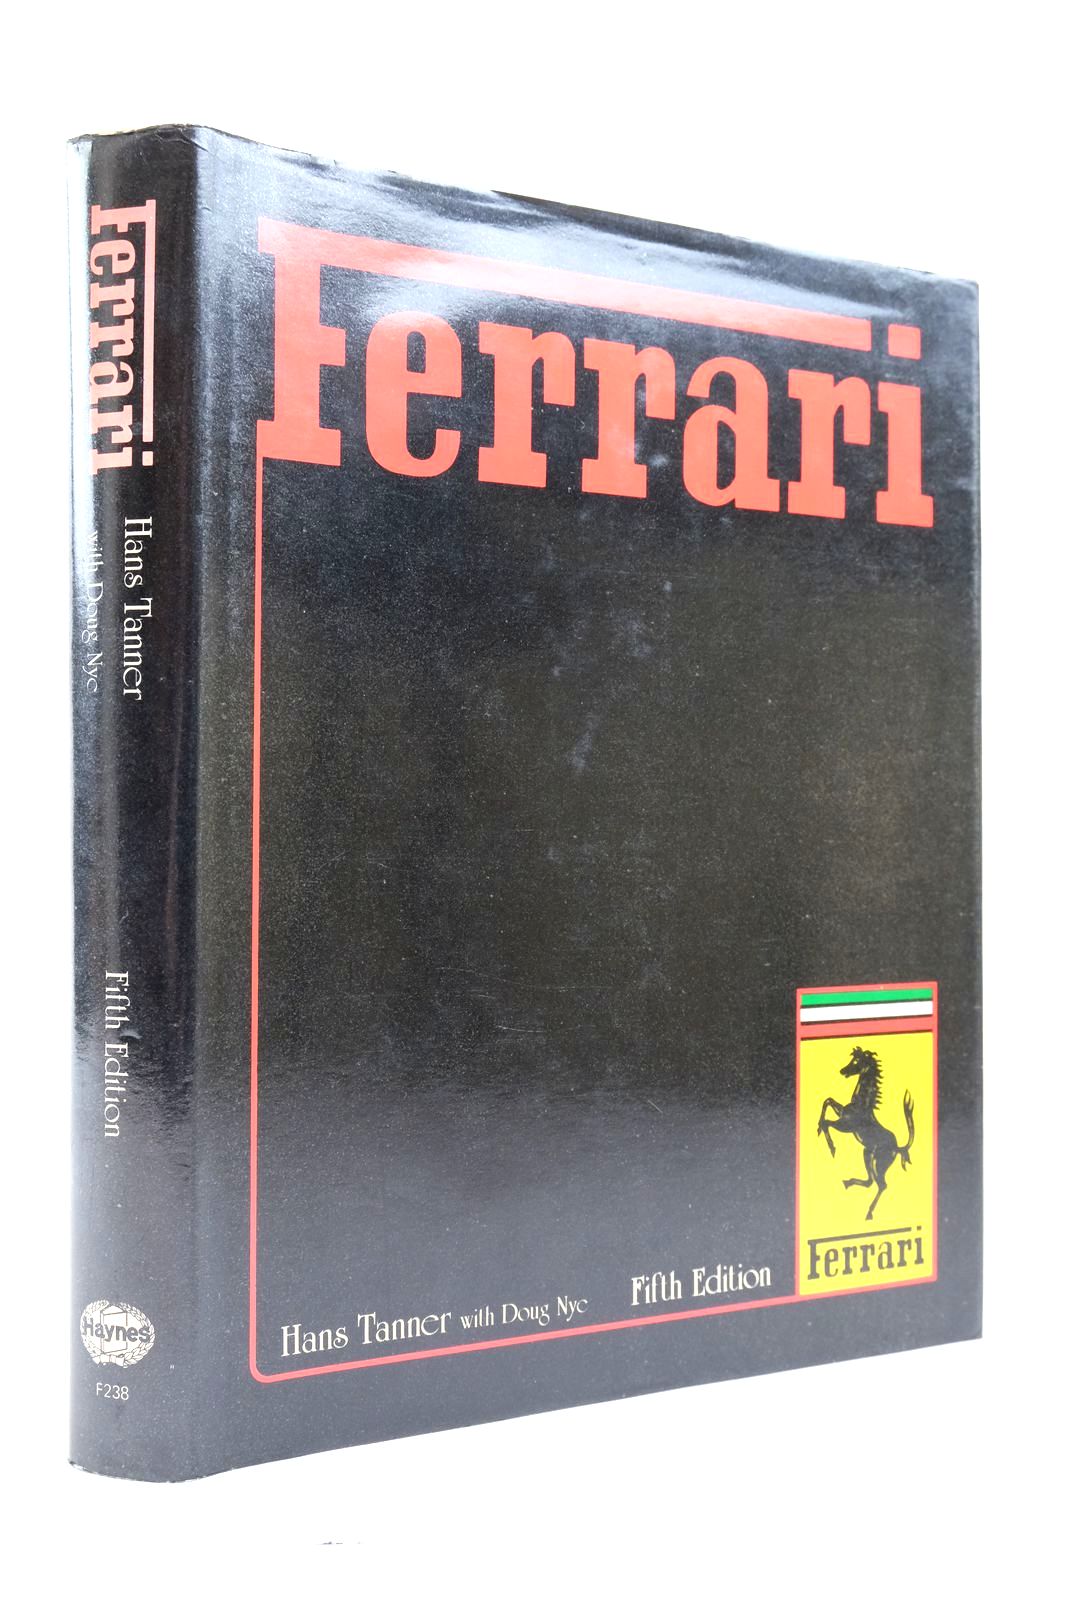 Photo of FERRARI written by Tanner, Hans
Nye, Doug published by Haynes Publishing Group (STOCK CODE: 2139575)  for sale by Stella & Rose's Books